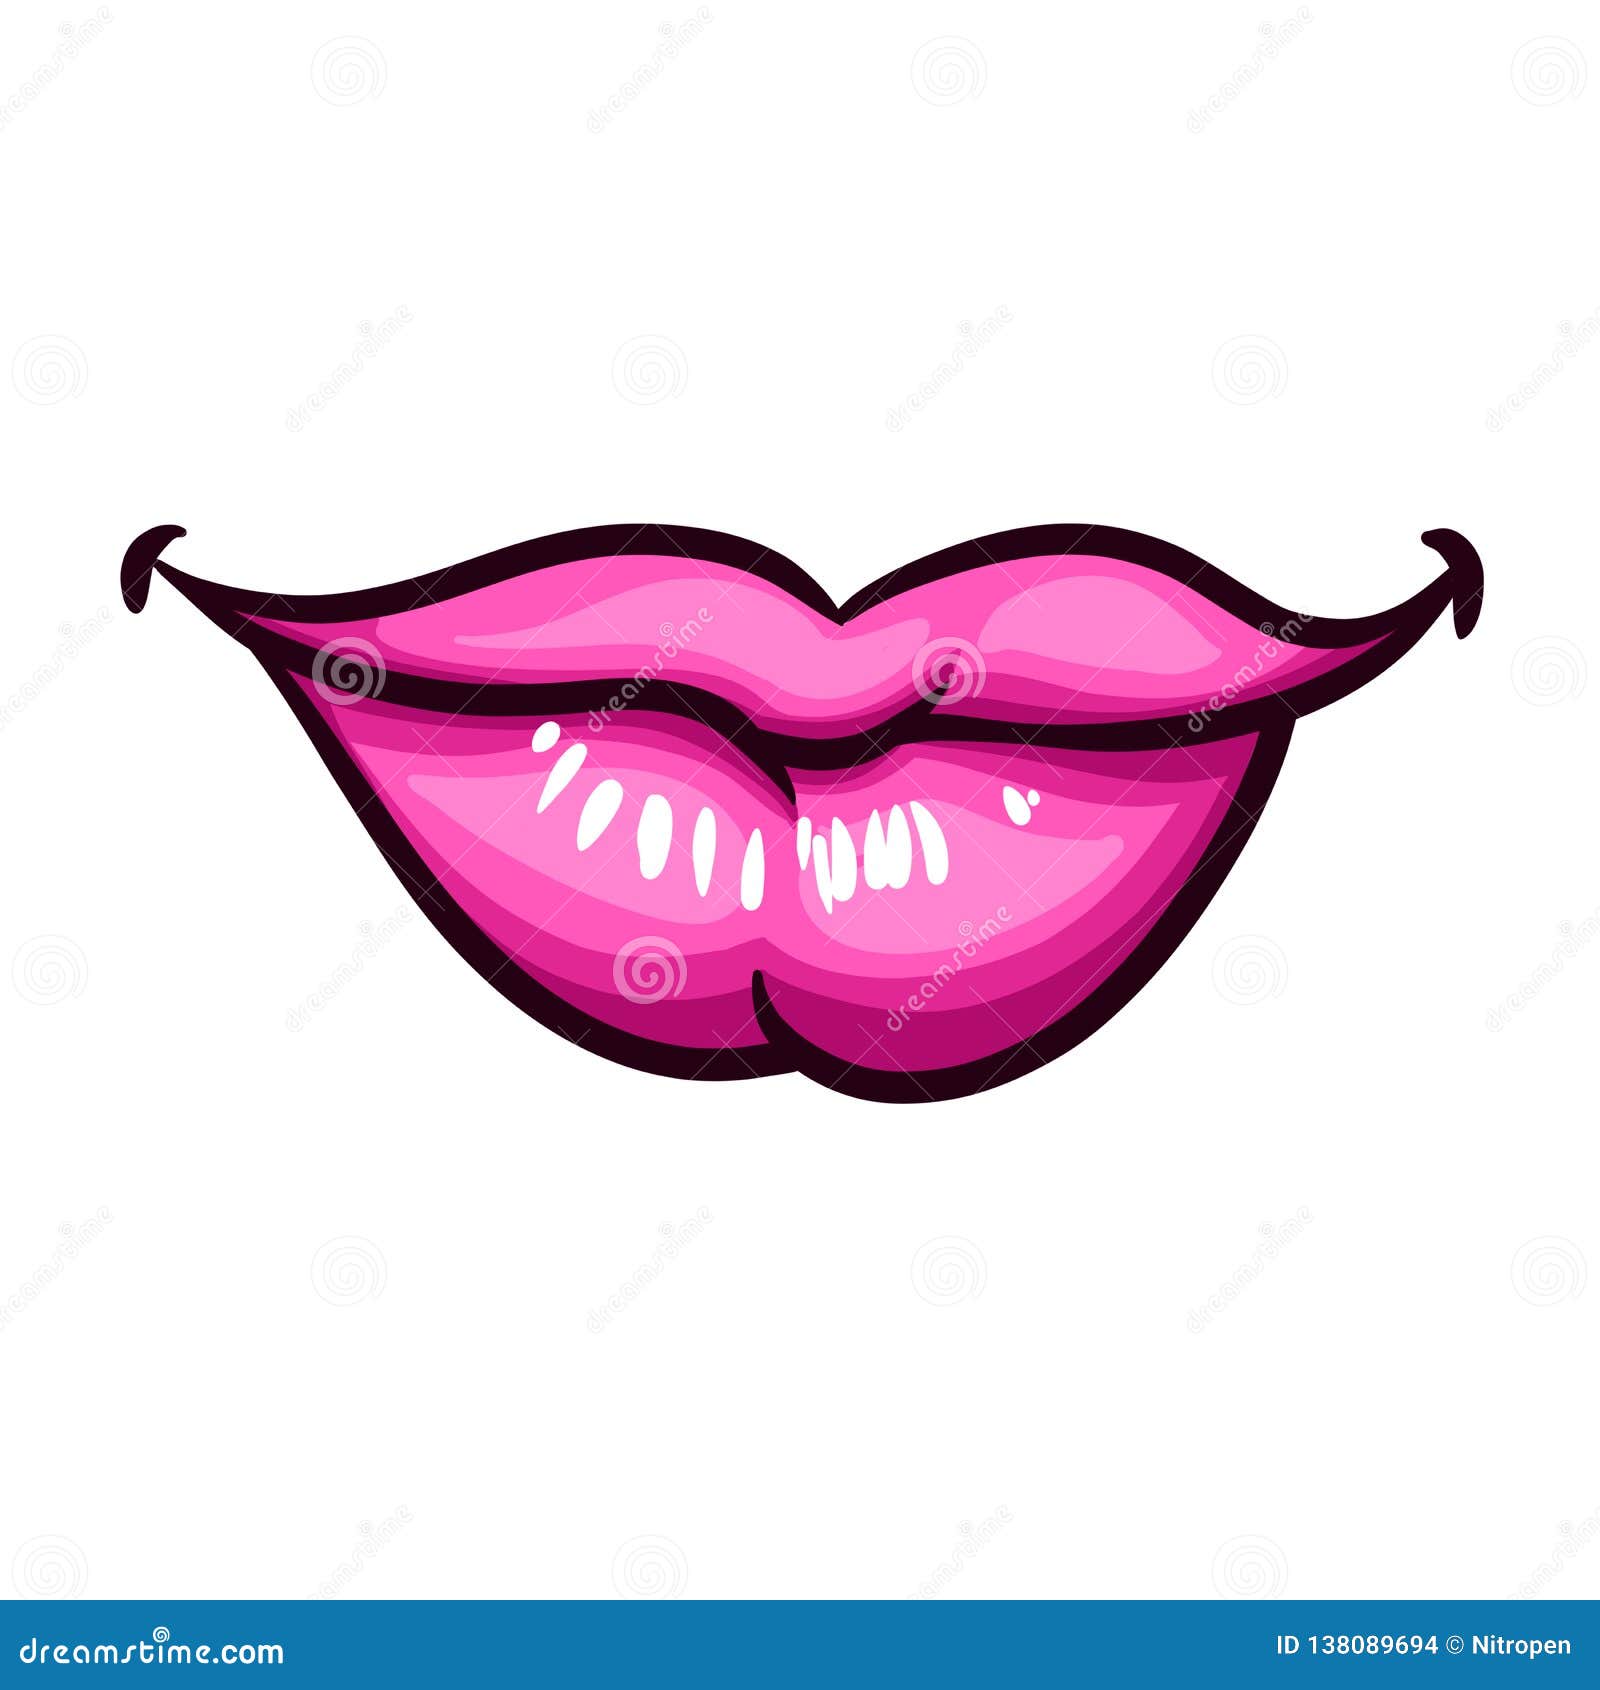 Female Cartoon Lips with a Smile Stock Vector - Illustration of retro, lips:  138089694